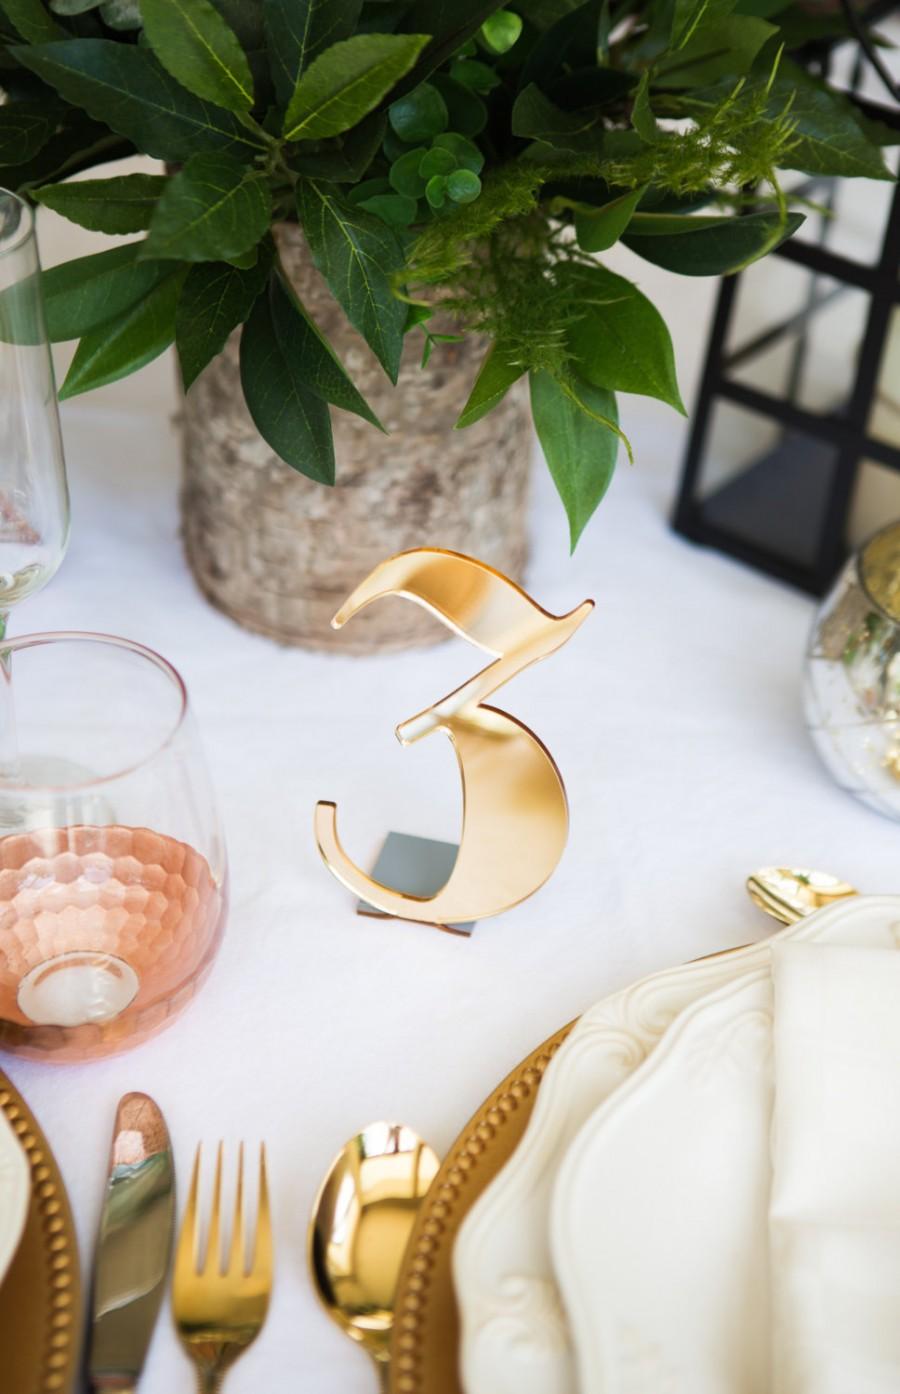 Wedding - Acrylic Table Numbers for Weddings and Events - Standing Numbers Gold, Silver, Clear Acrylic Chic Wedding Decor Centerpieces (Item - ACB100)